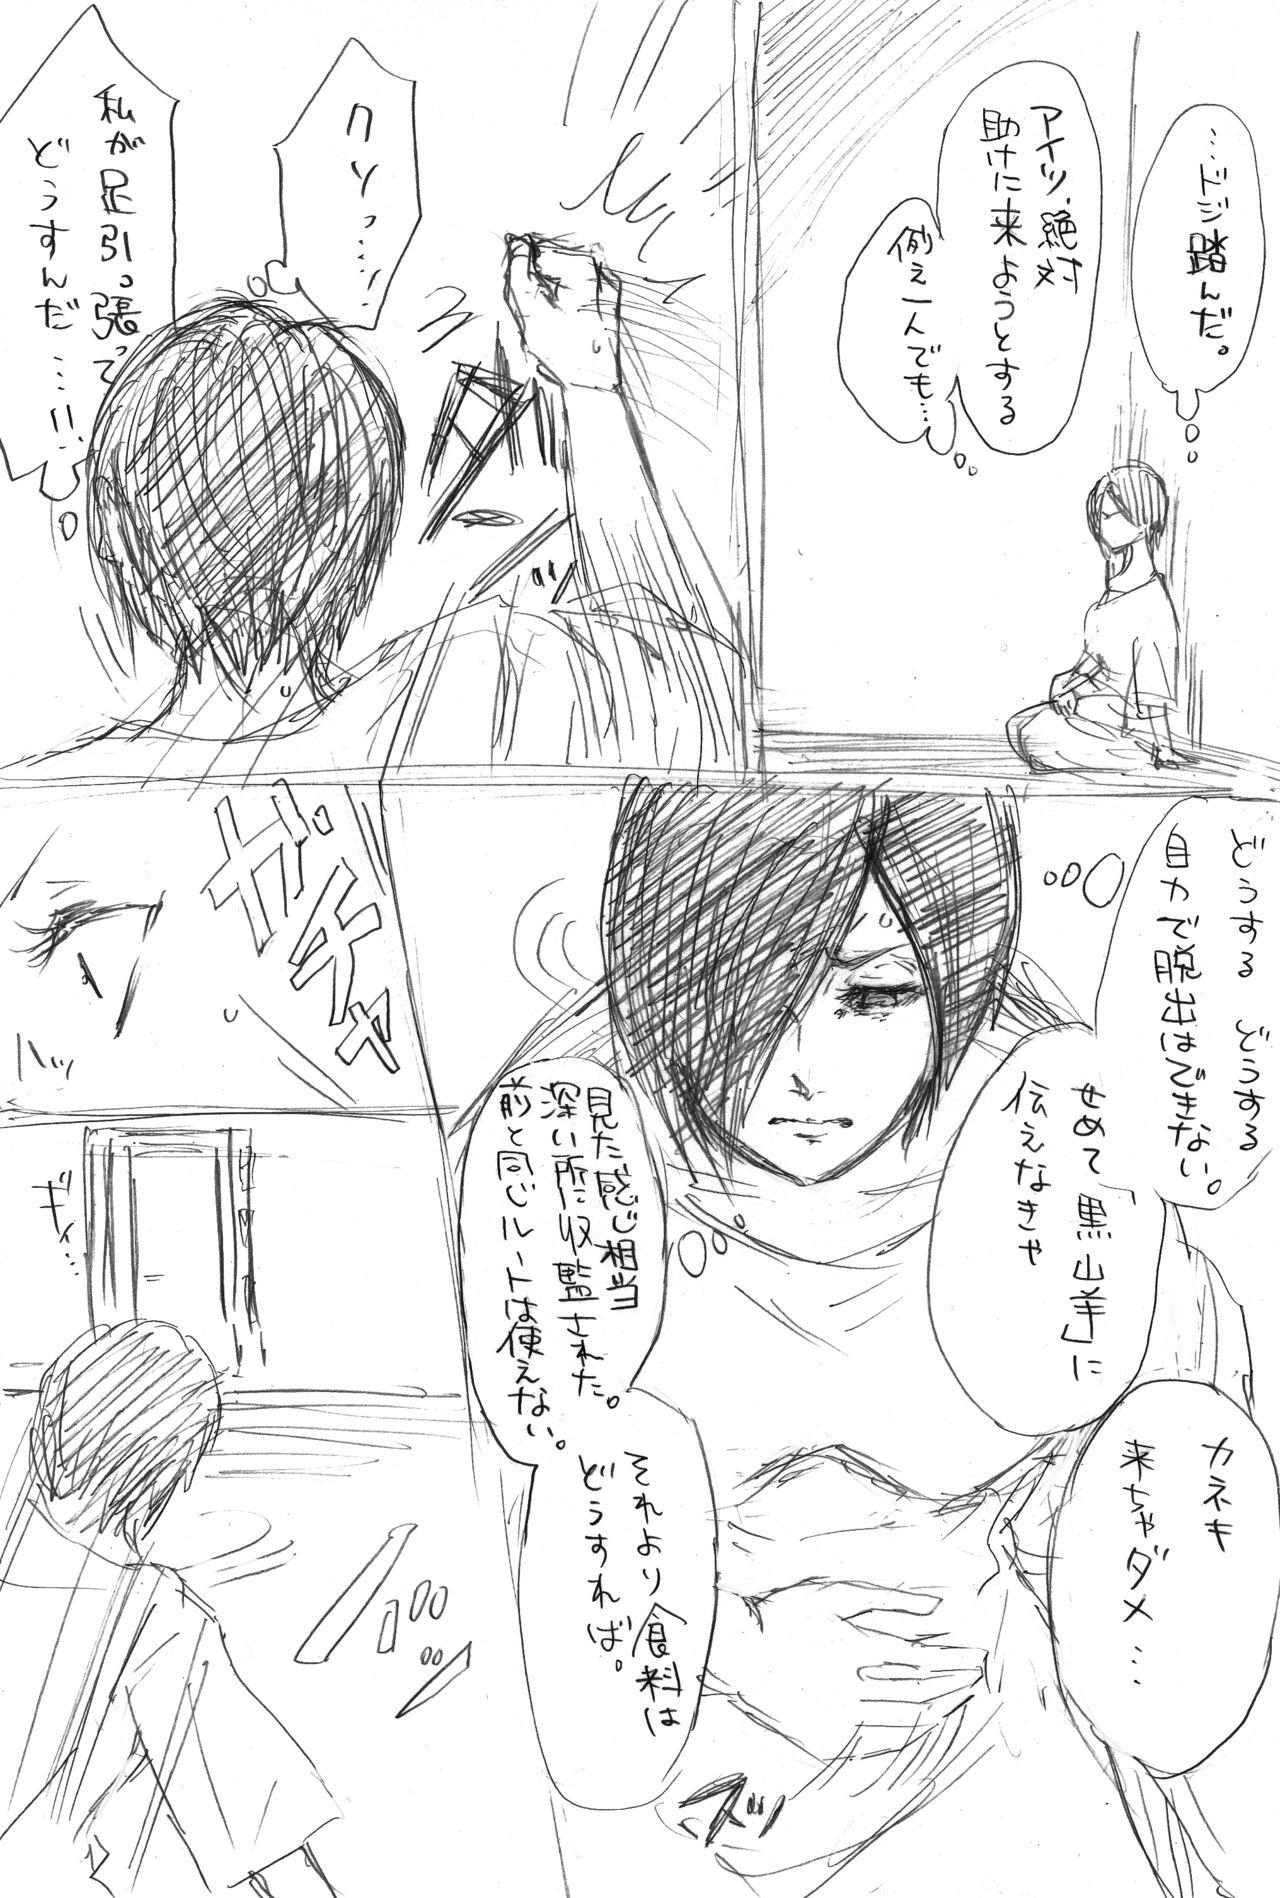 Masturbate トーカちゃん囚われIF - Tokyo ghoul Gay Oralsex - Page 4